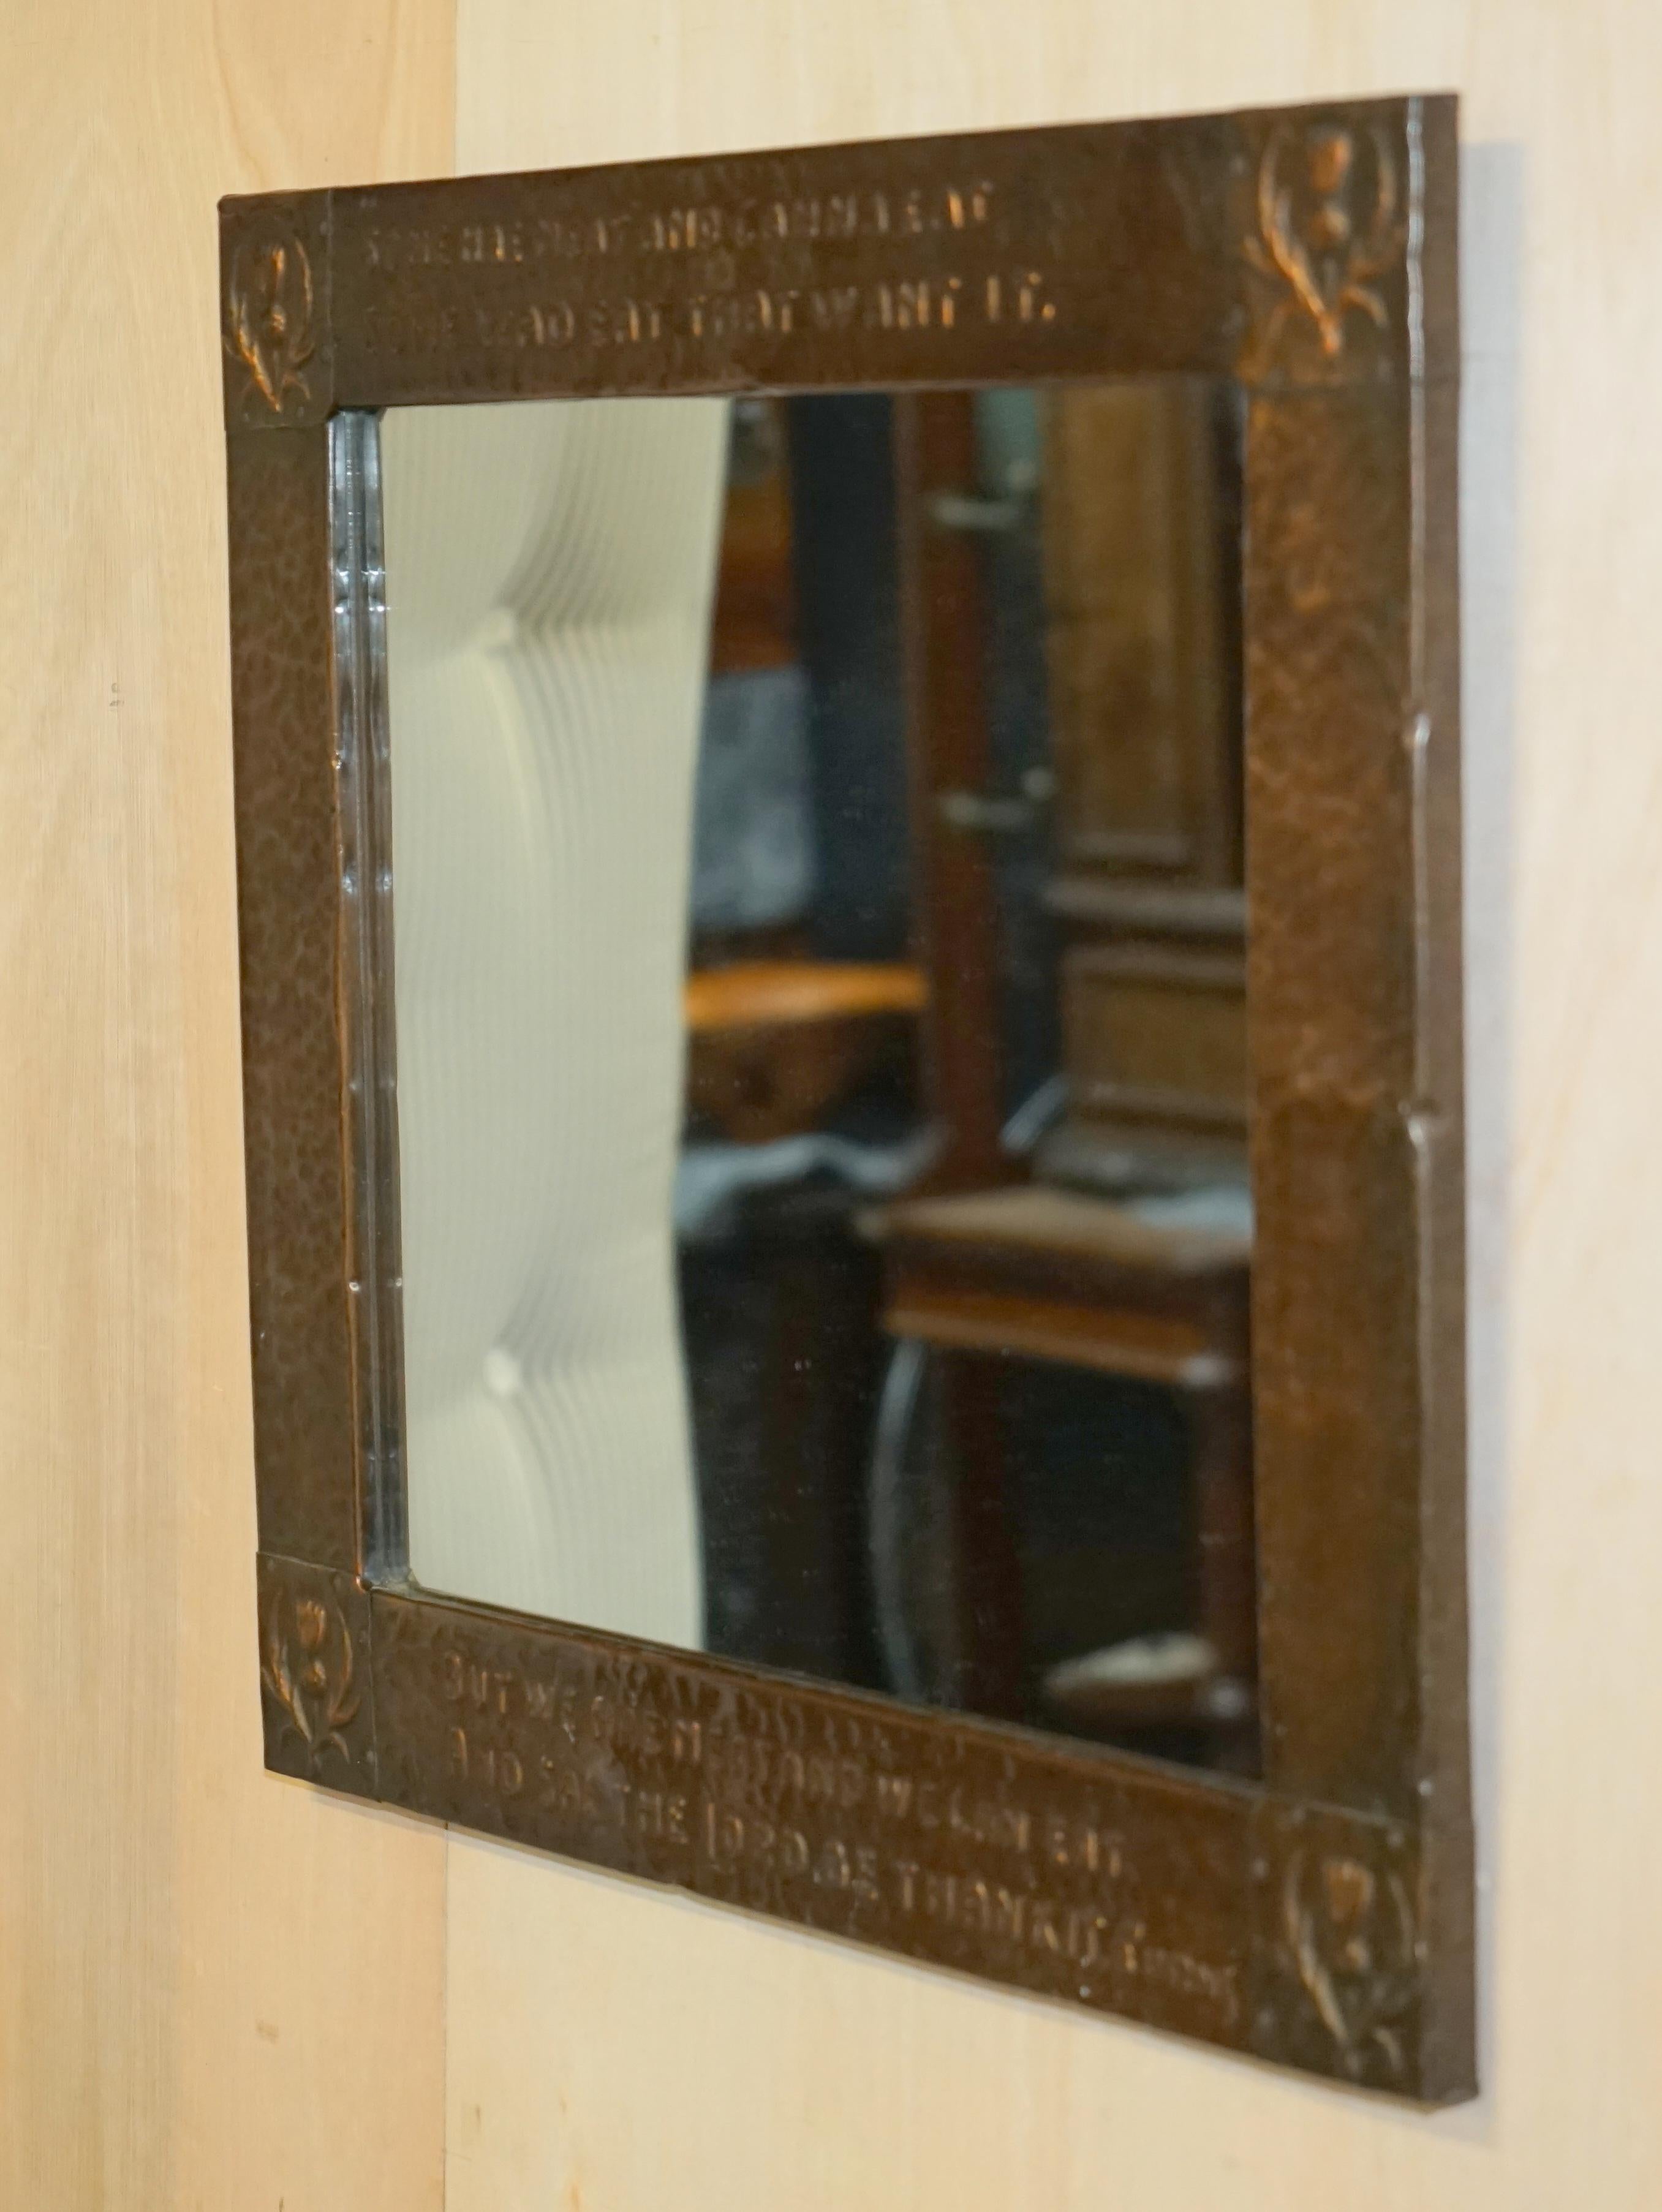 FINE LIBERTY'S LONDON MIRROR WiTH ROBERT BURNS SCOTTISH POEM THE SELKIRK GRACE For Sale 2